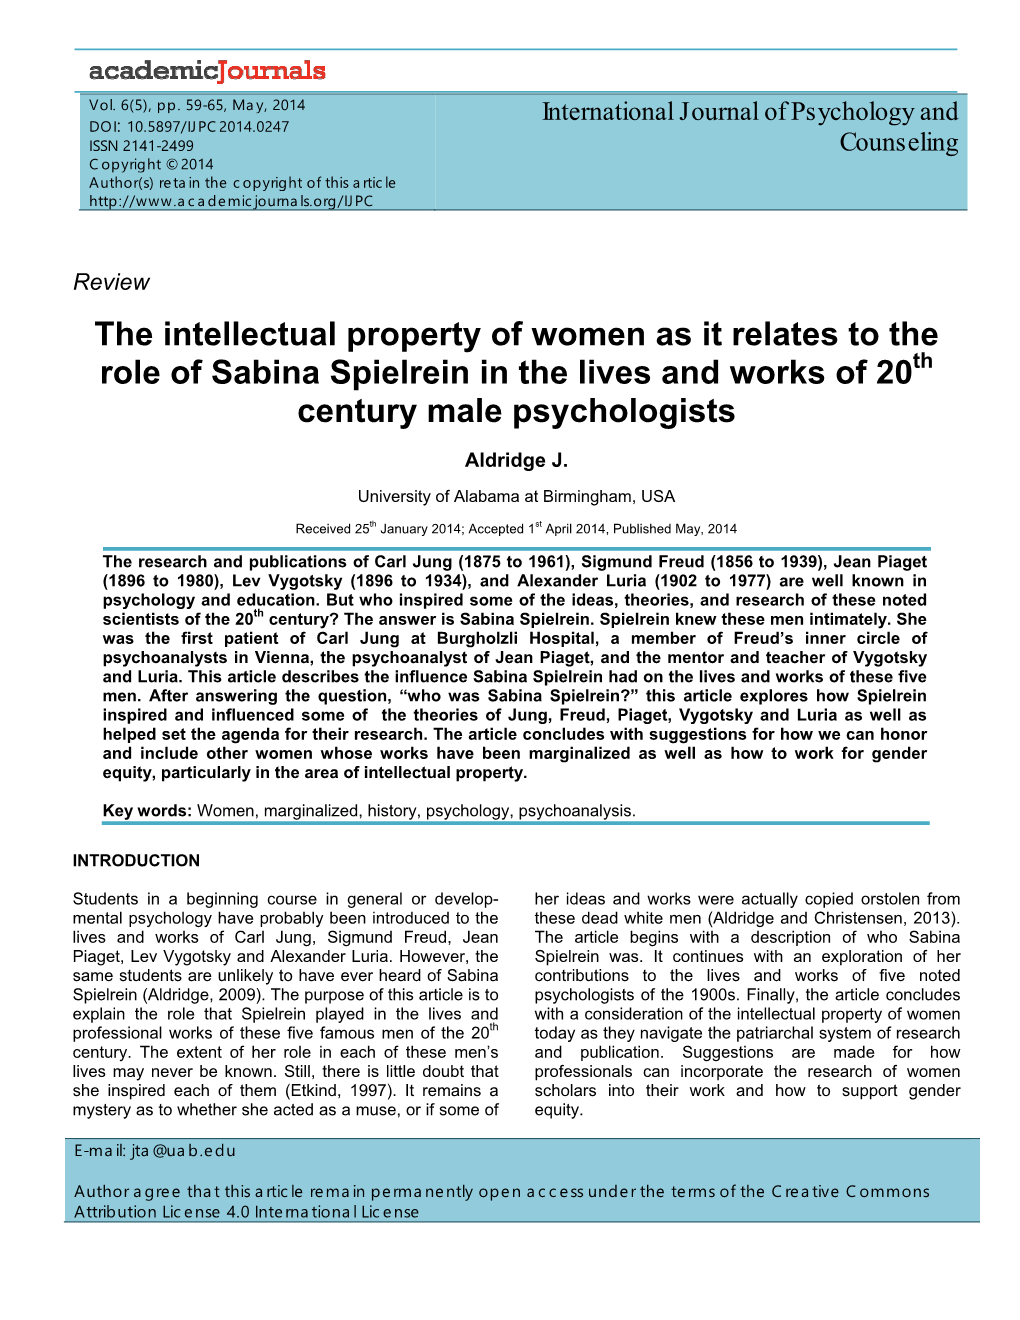 The Intellectual Property of Women As It Relates to the Role of Sabina Spielrein in the Lives and Works of 20Th Century Male Psychologists